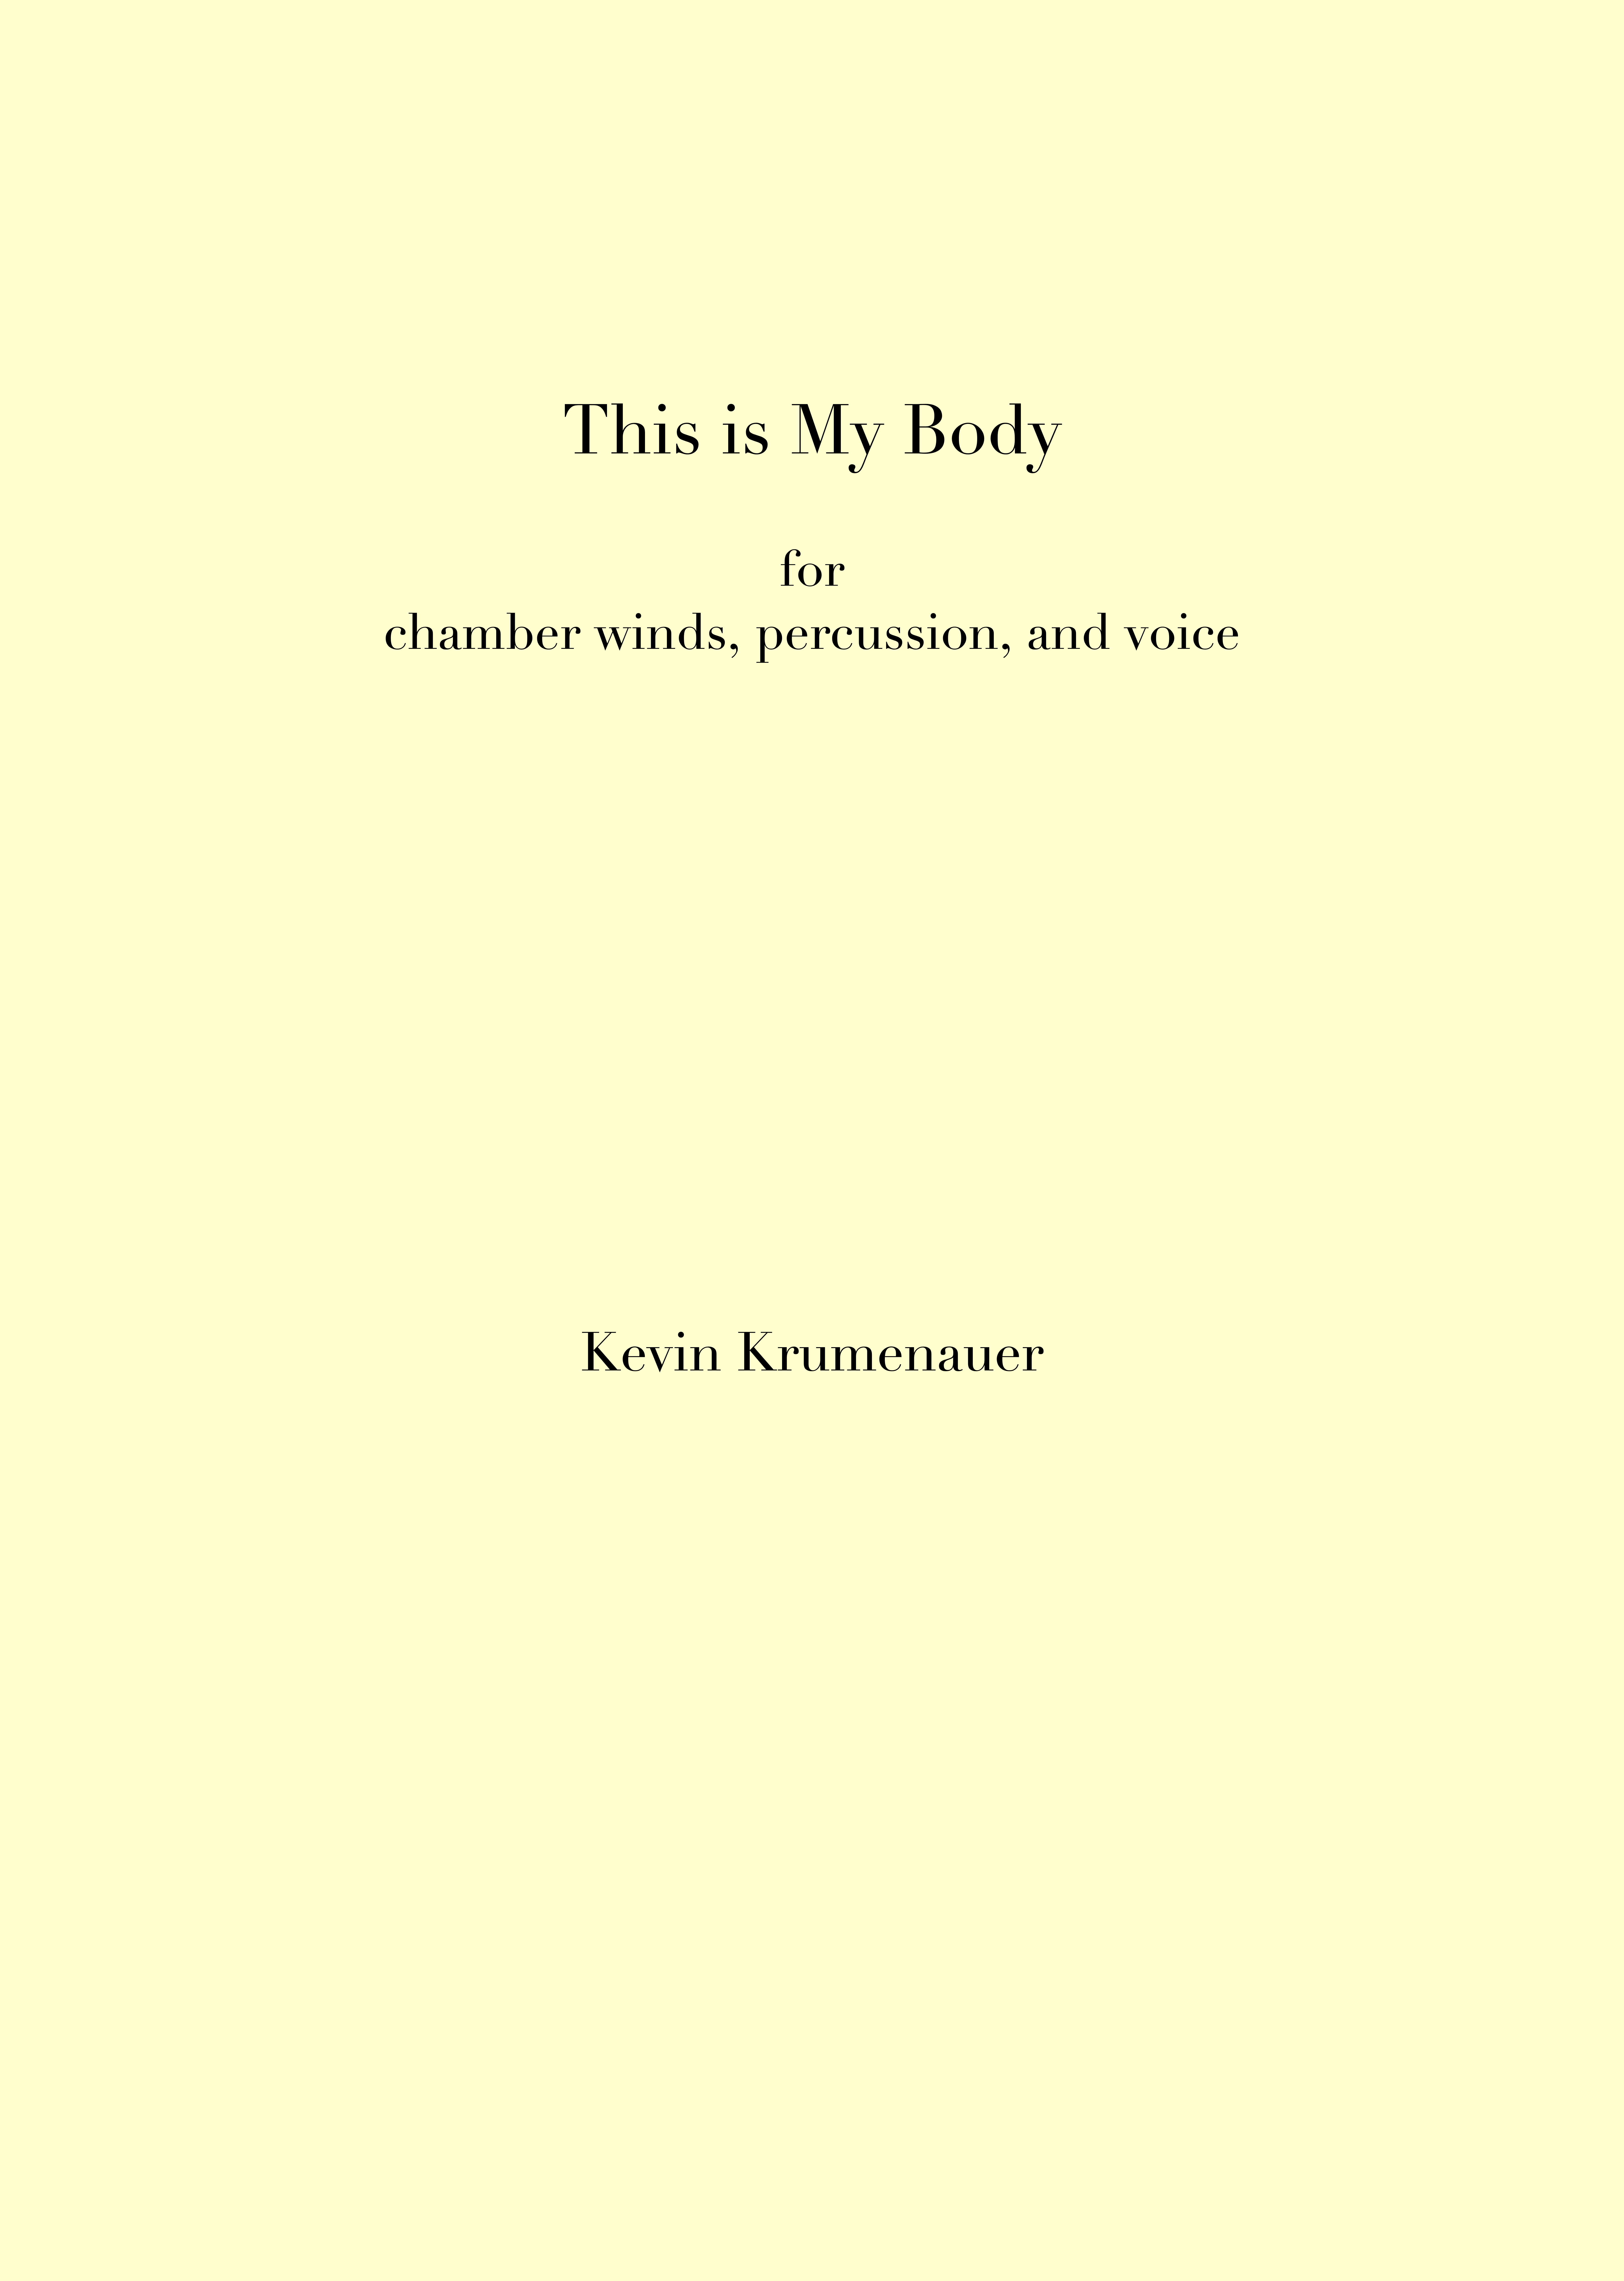 This is My Body (2014)